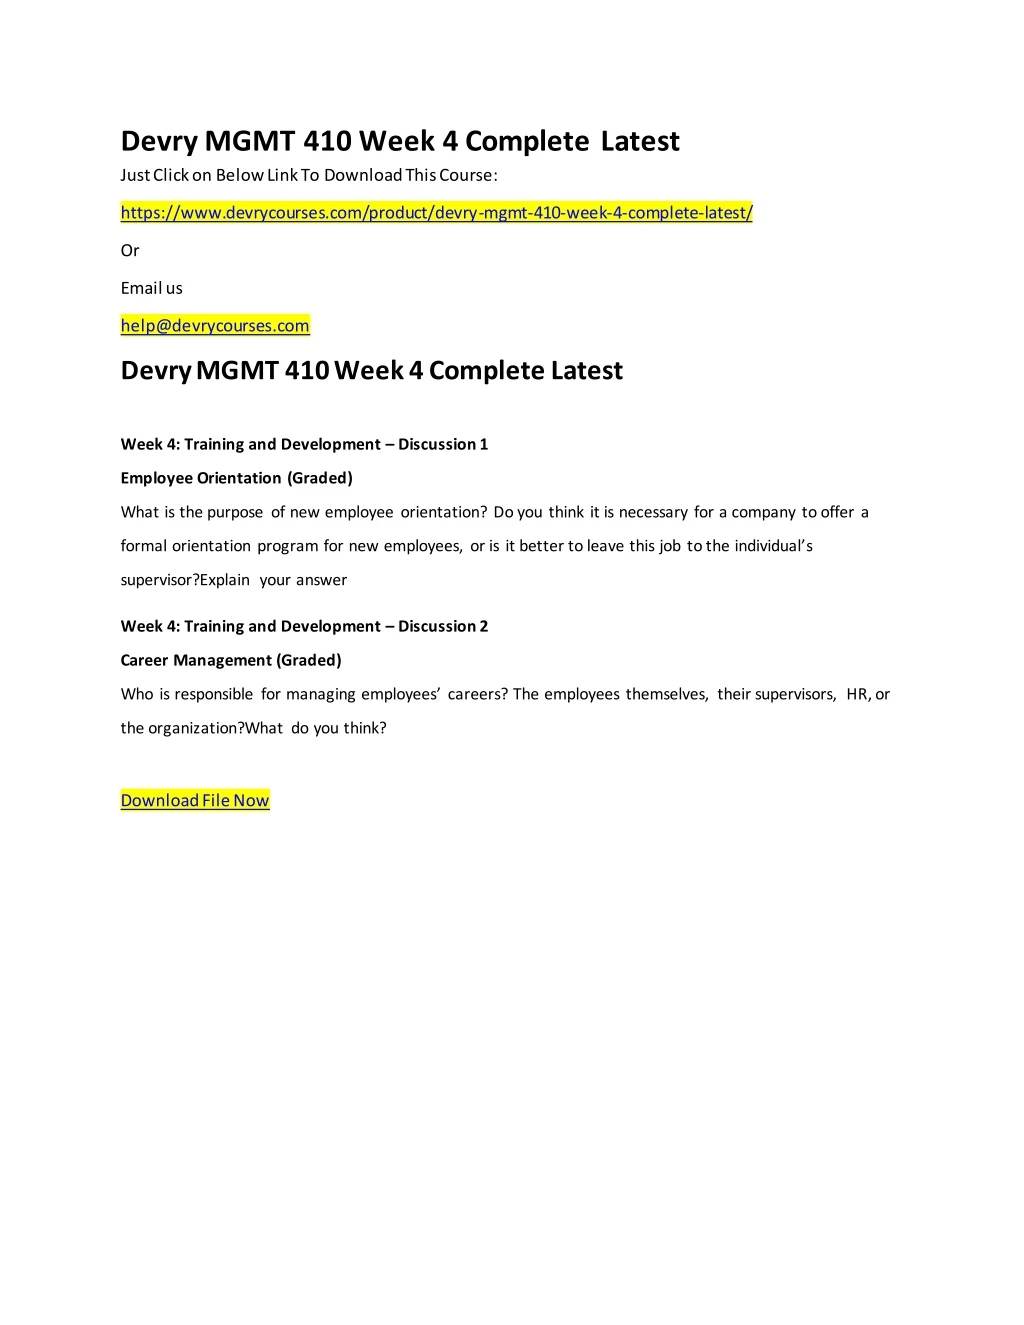 devry mgmt 410 week 4 complete latest just click